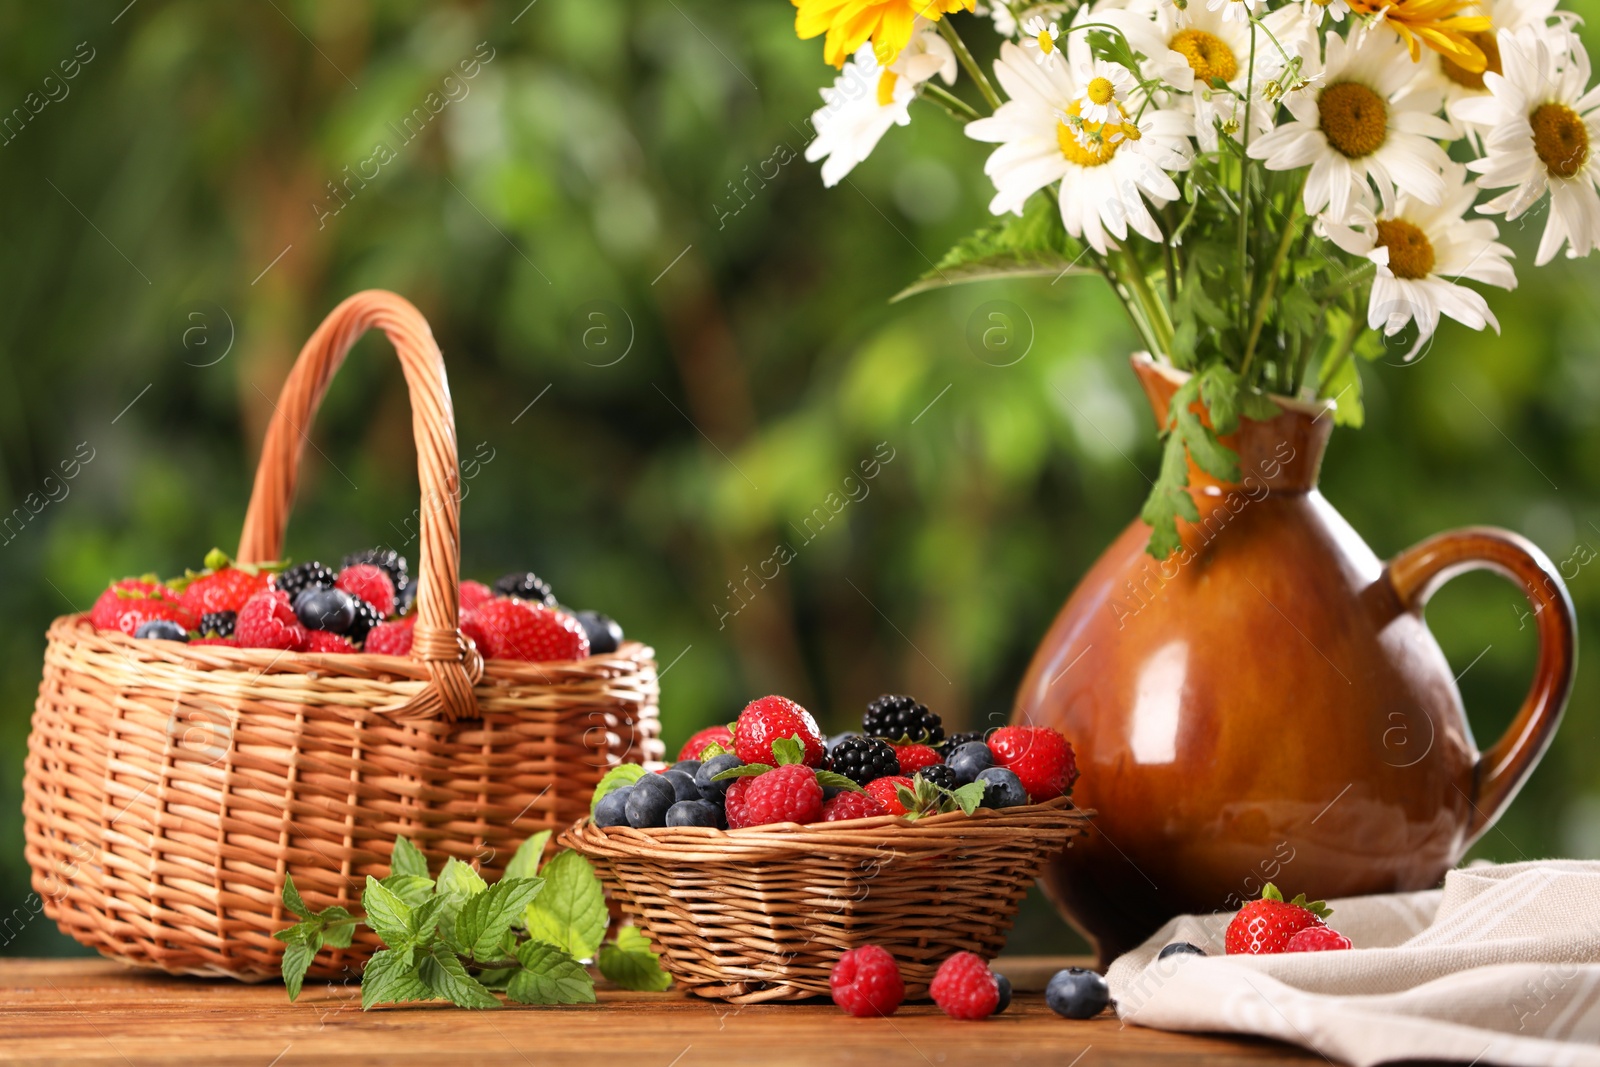 Photo of Different fresh ripe berries and beautiful flowers on wooden table outdoors